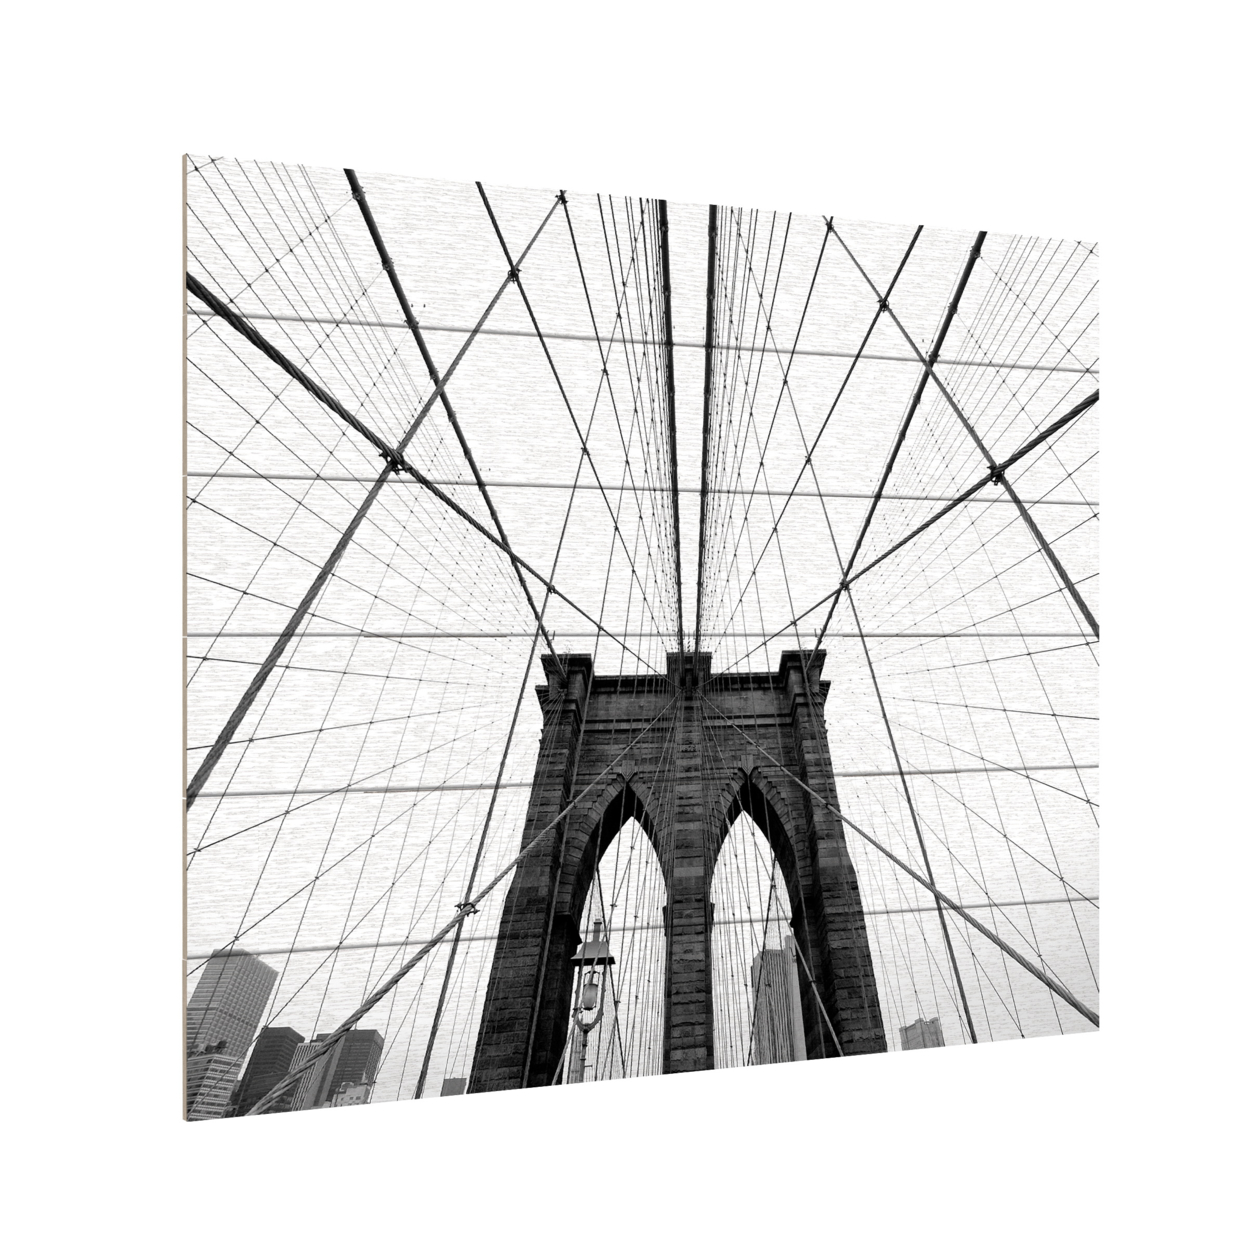 Wooden Slat Art 18 X 22 Inches Titled NYC Brooklyn Bridge Ready To Hang Home Decor Picture